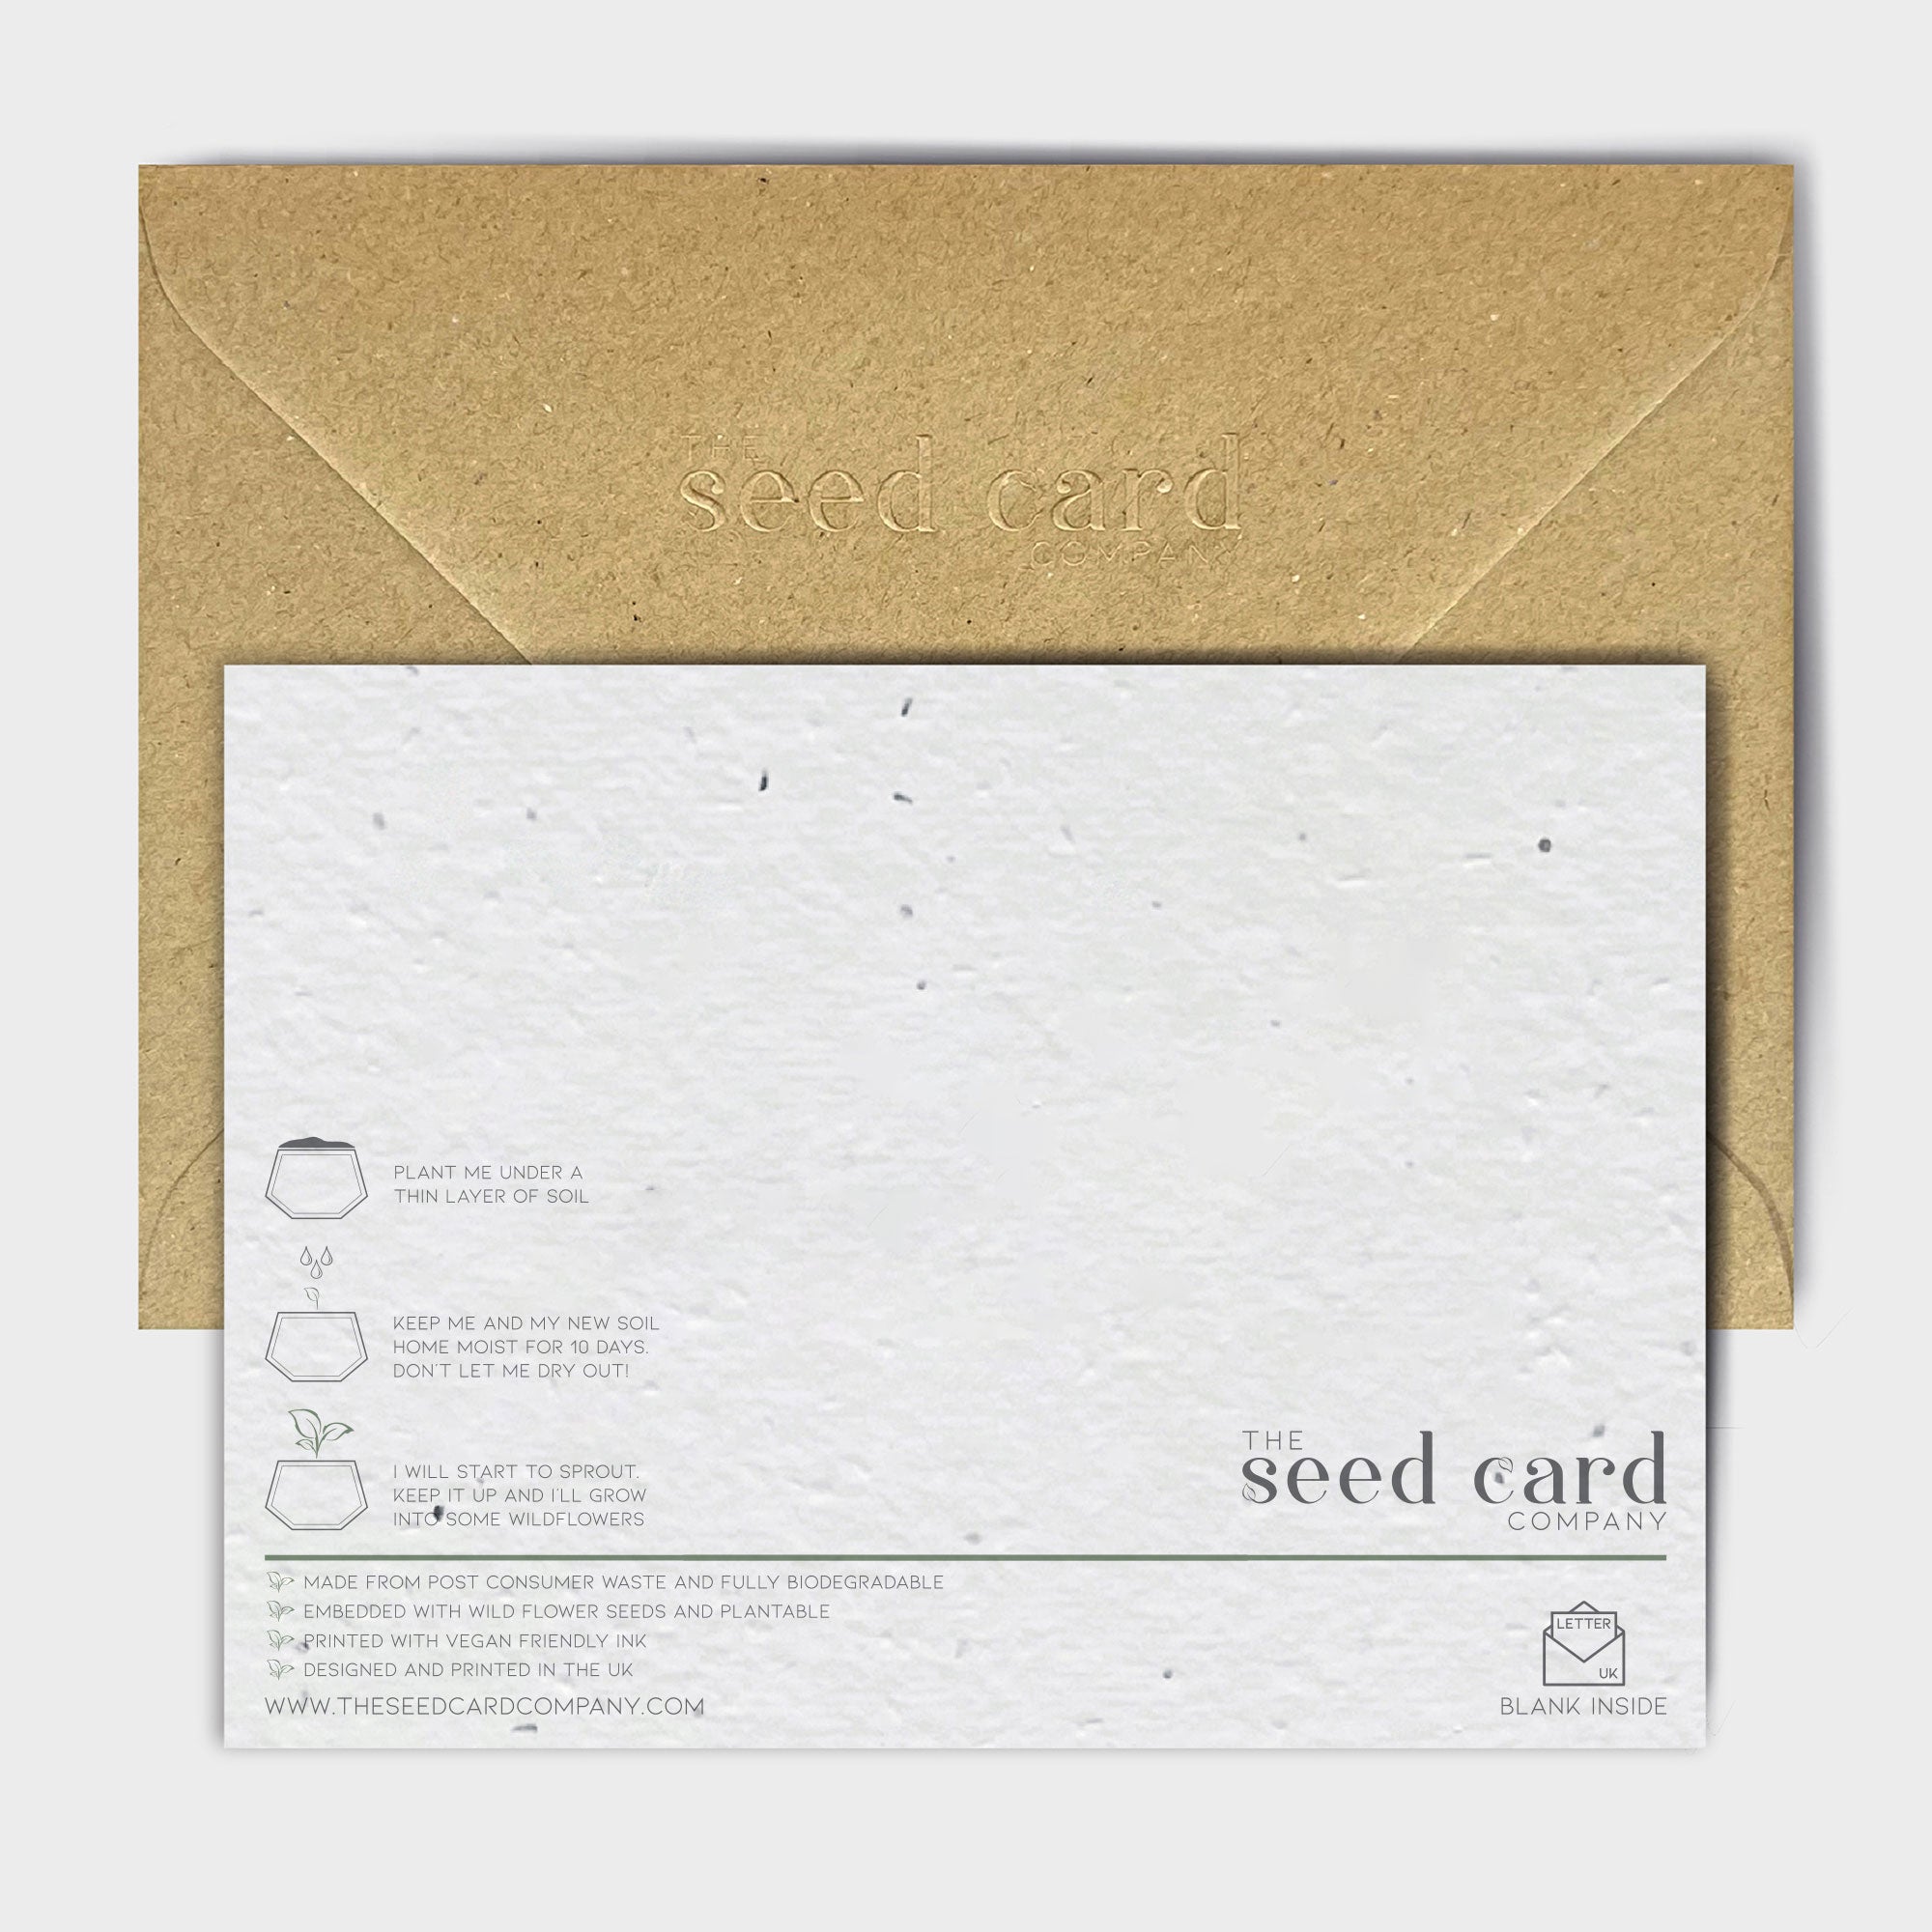 Shop online Merci Merci - 100% biodegradable seed-embedded cards Shop -The Seed Card Company